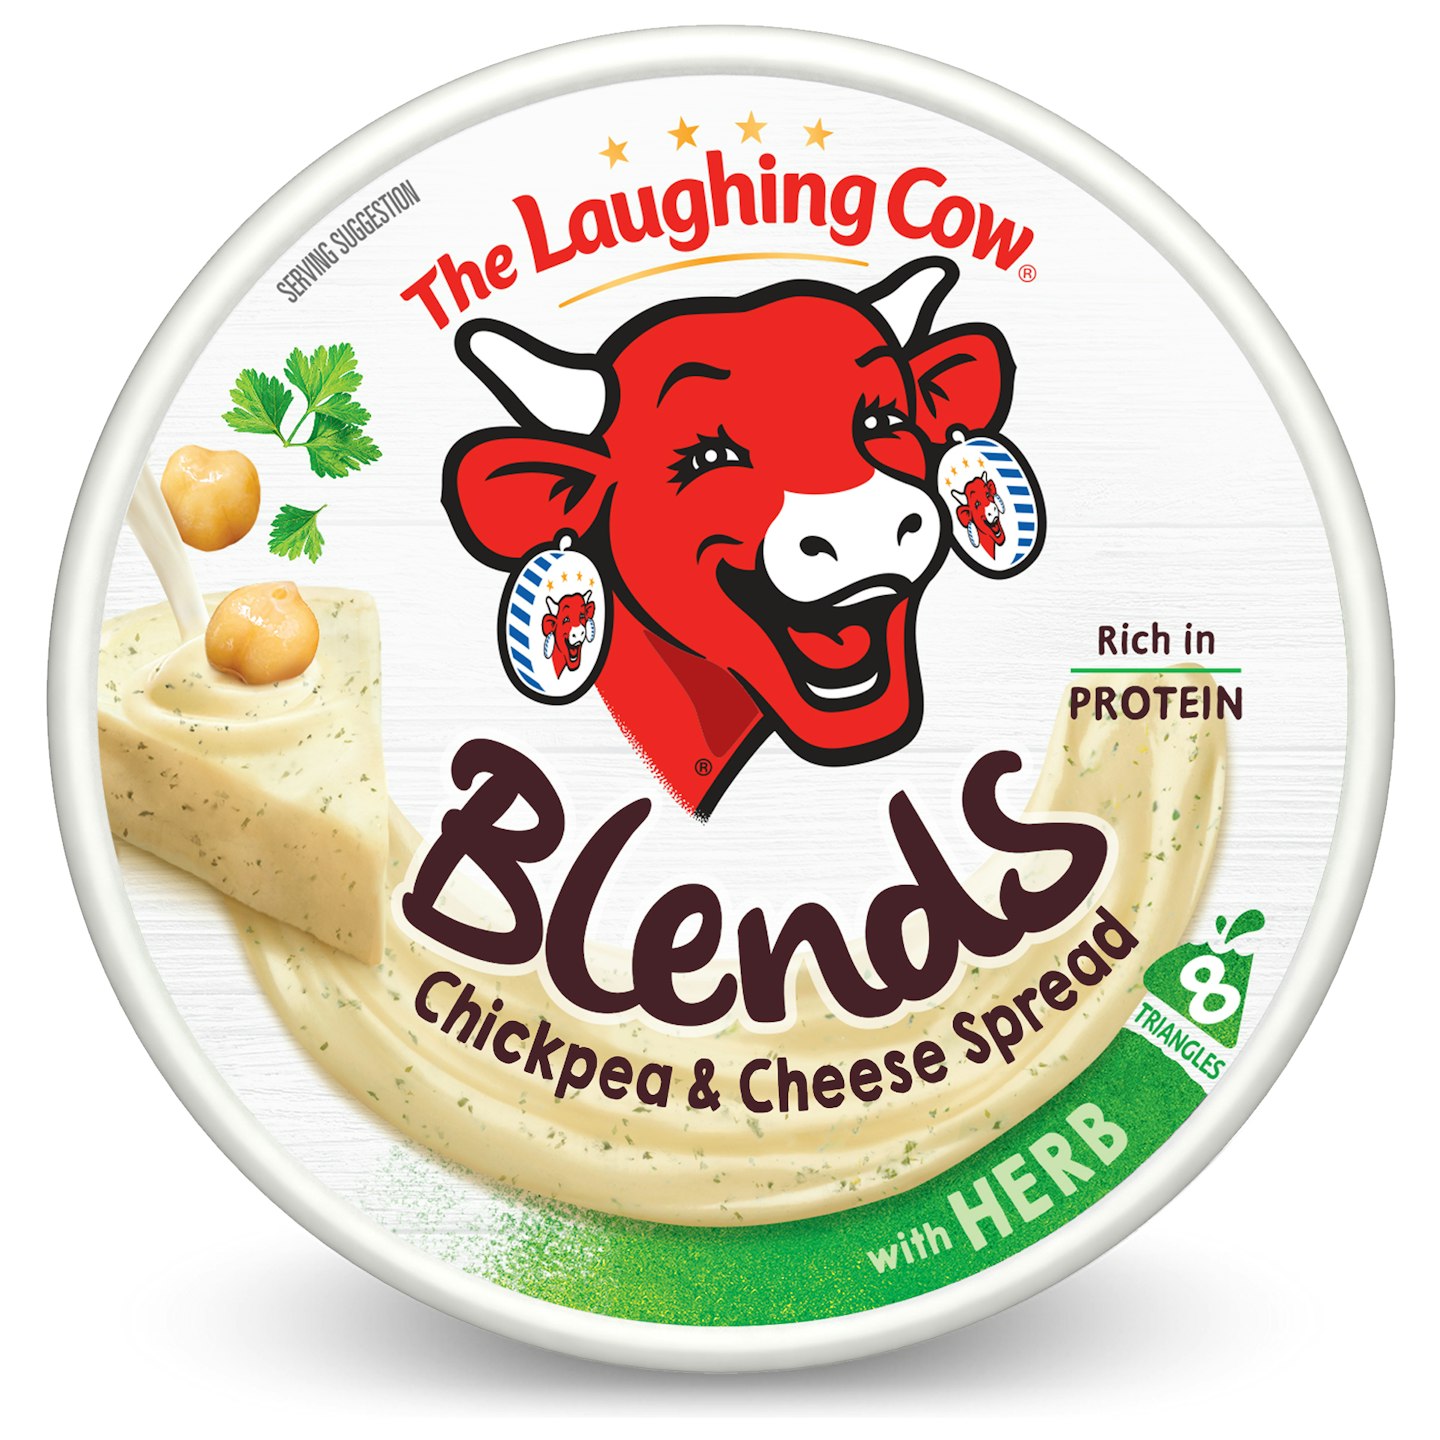 The Laughing Cow Blends